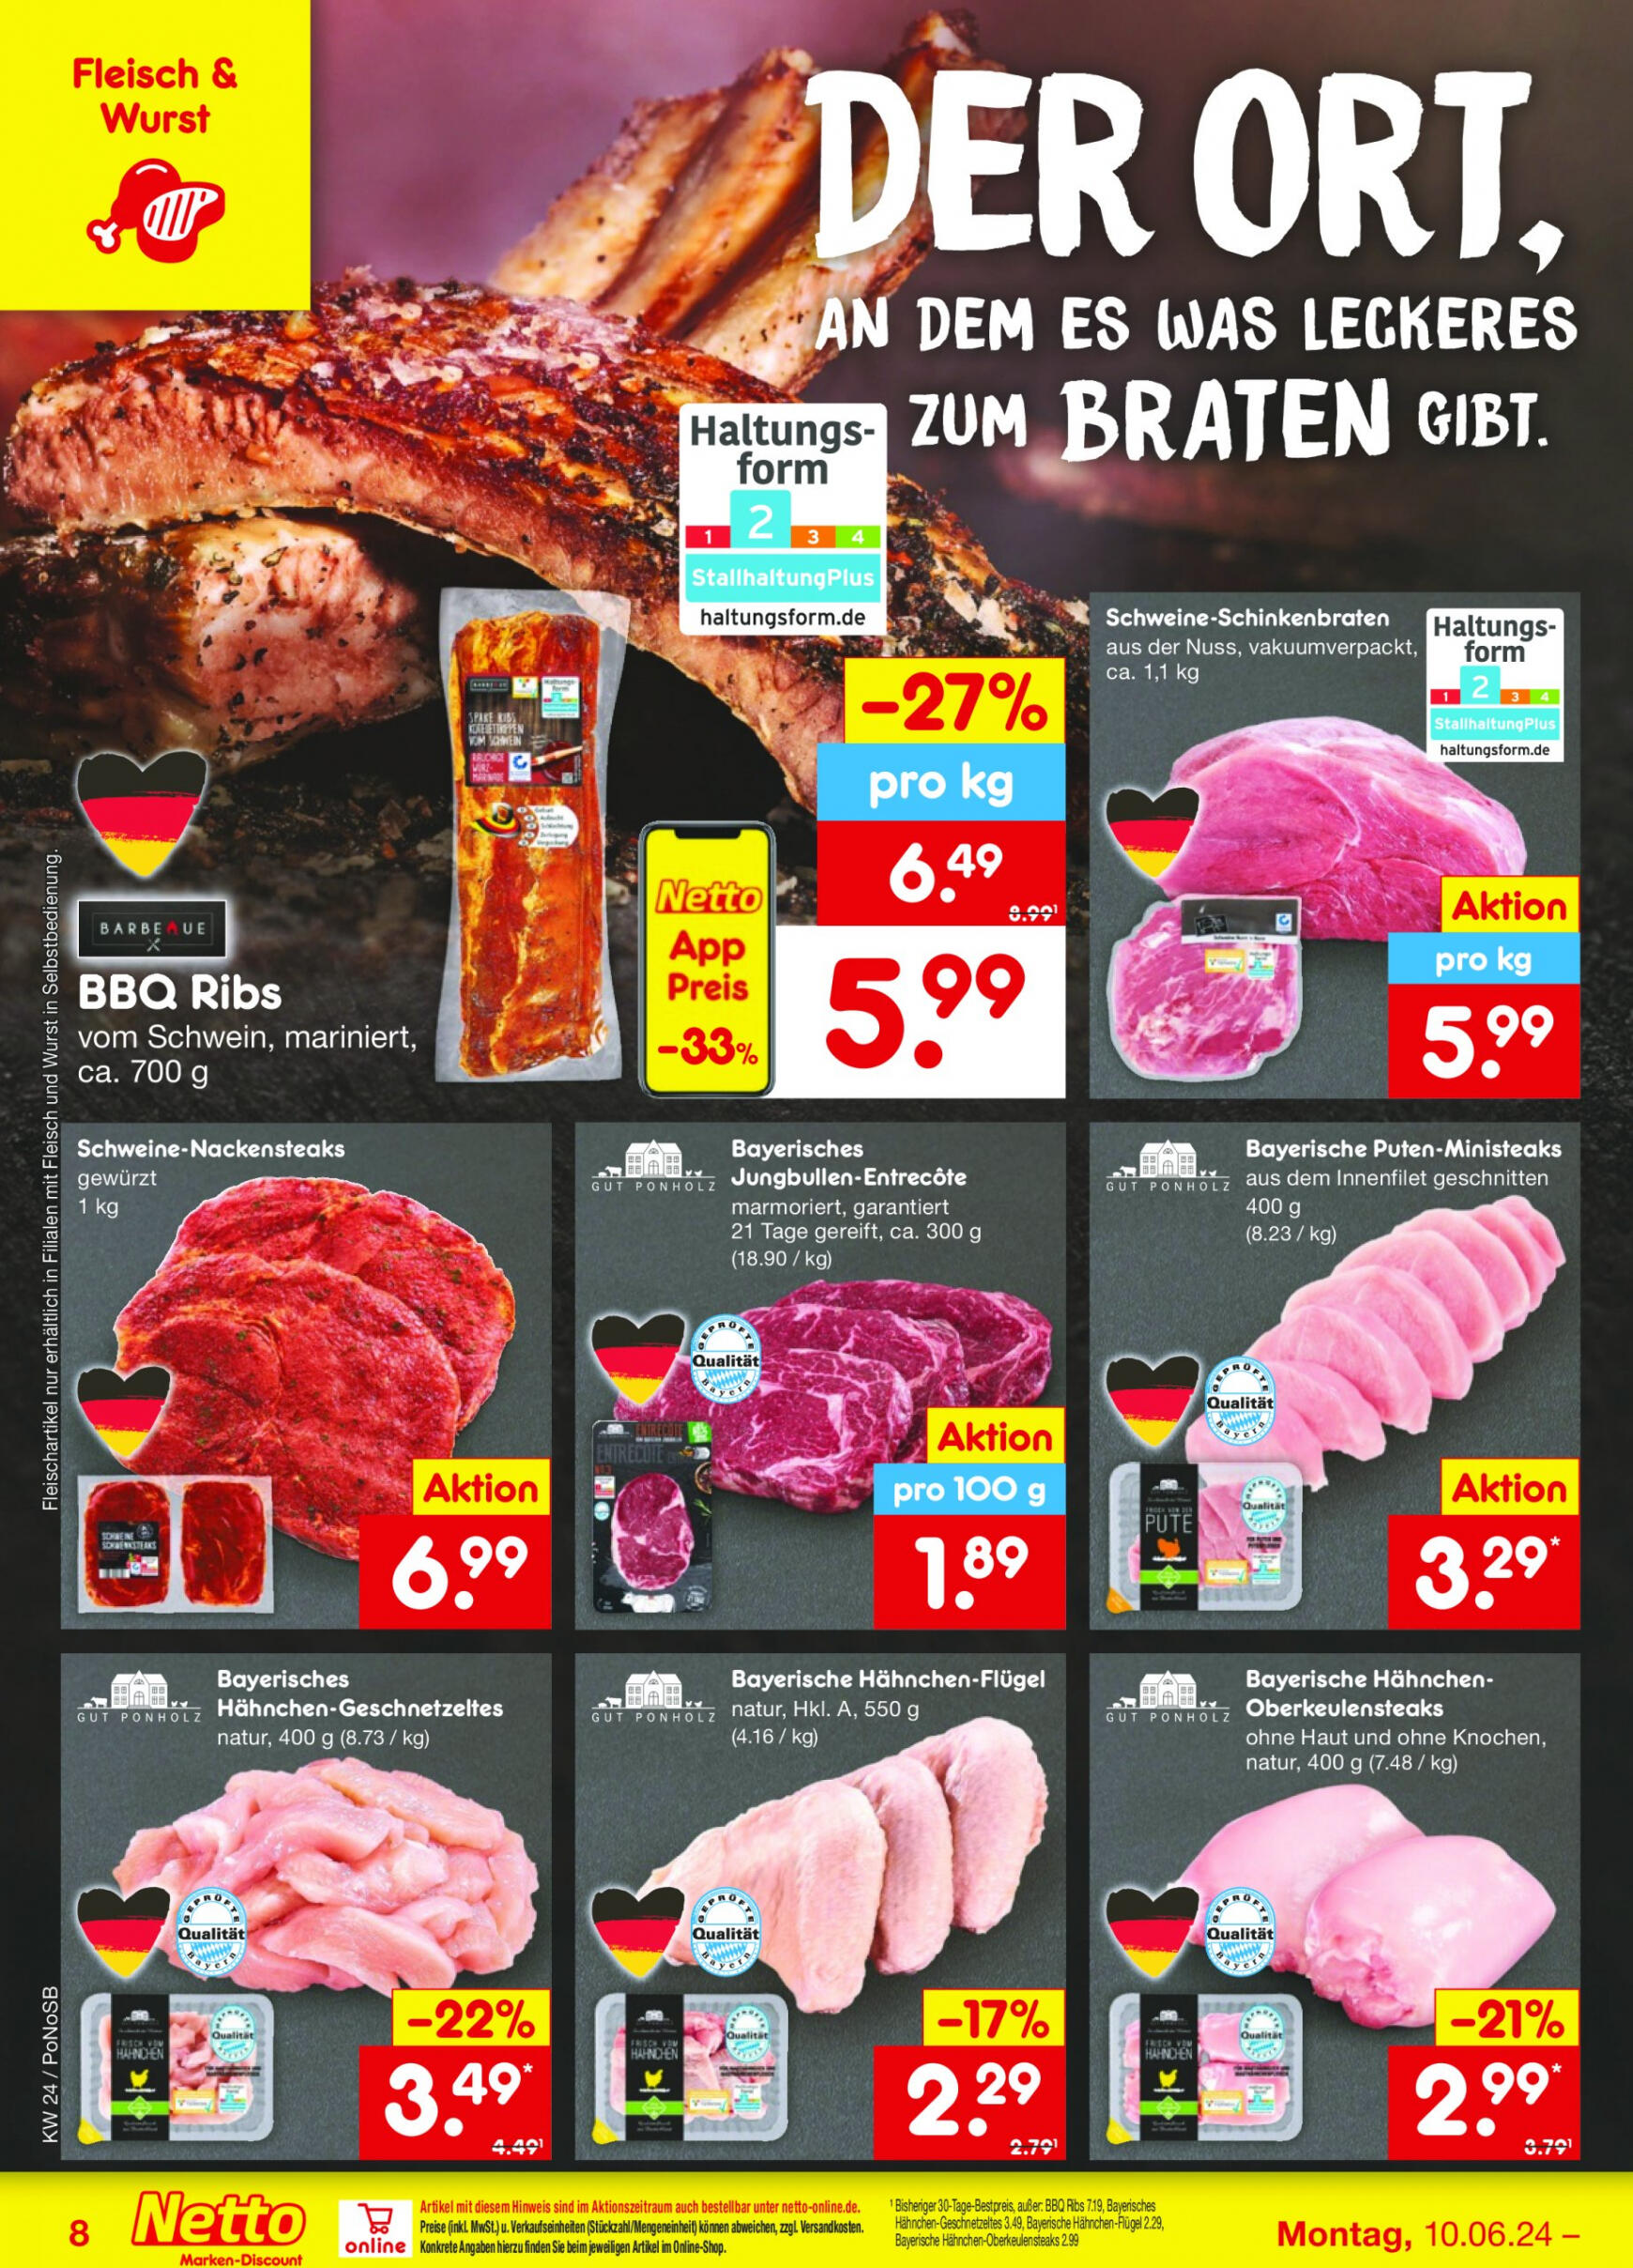 netto - Flyer Netto aktuell 10.06. - 15.06. - page: 10